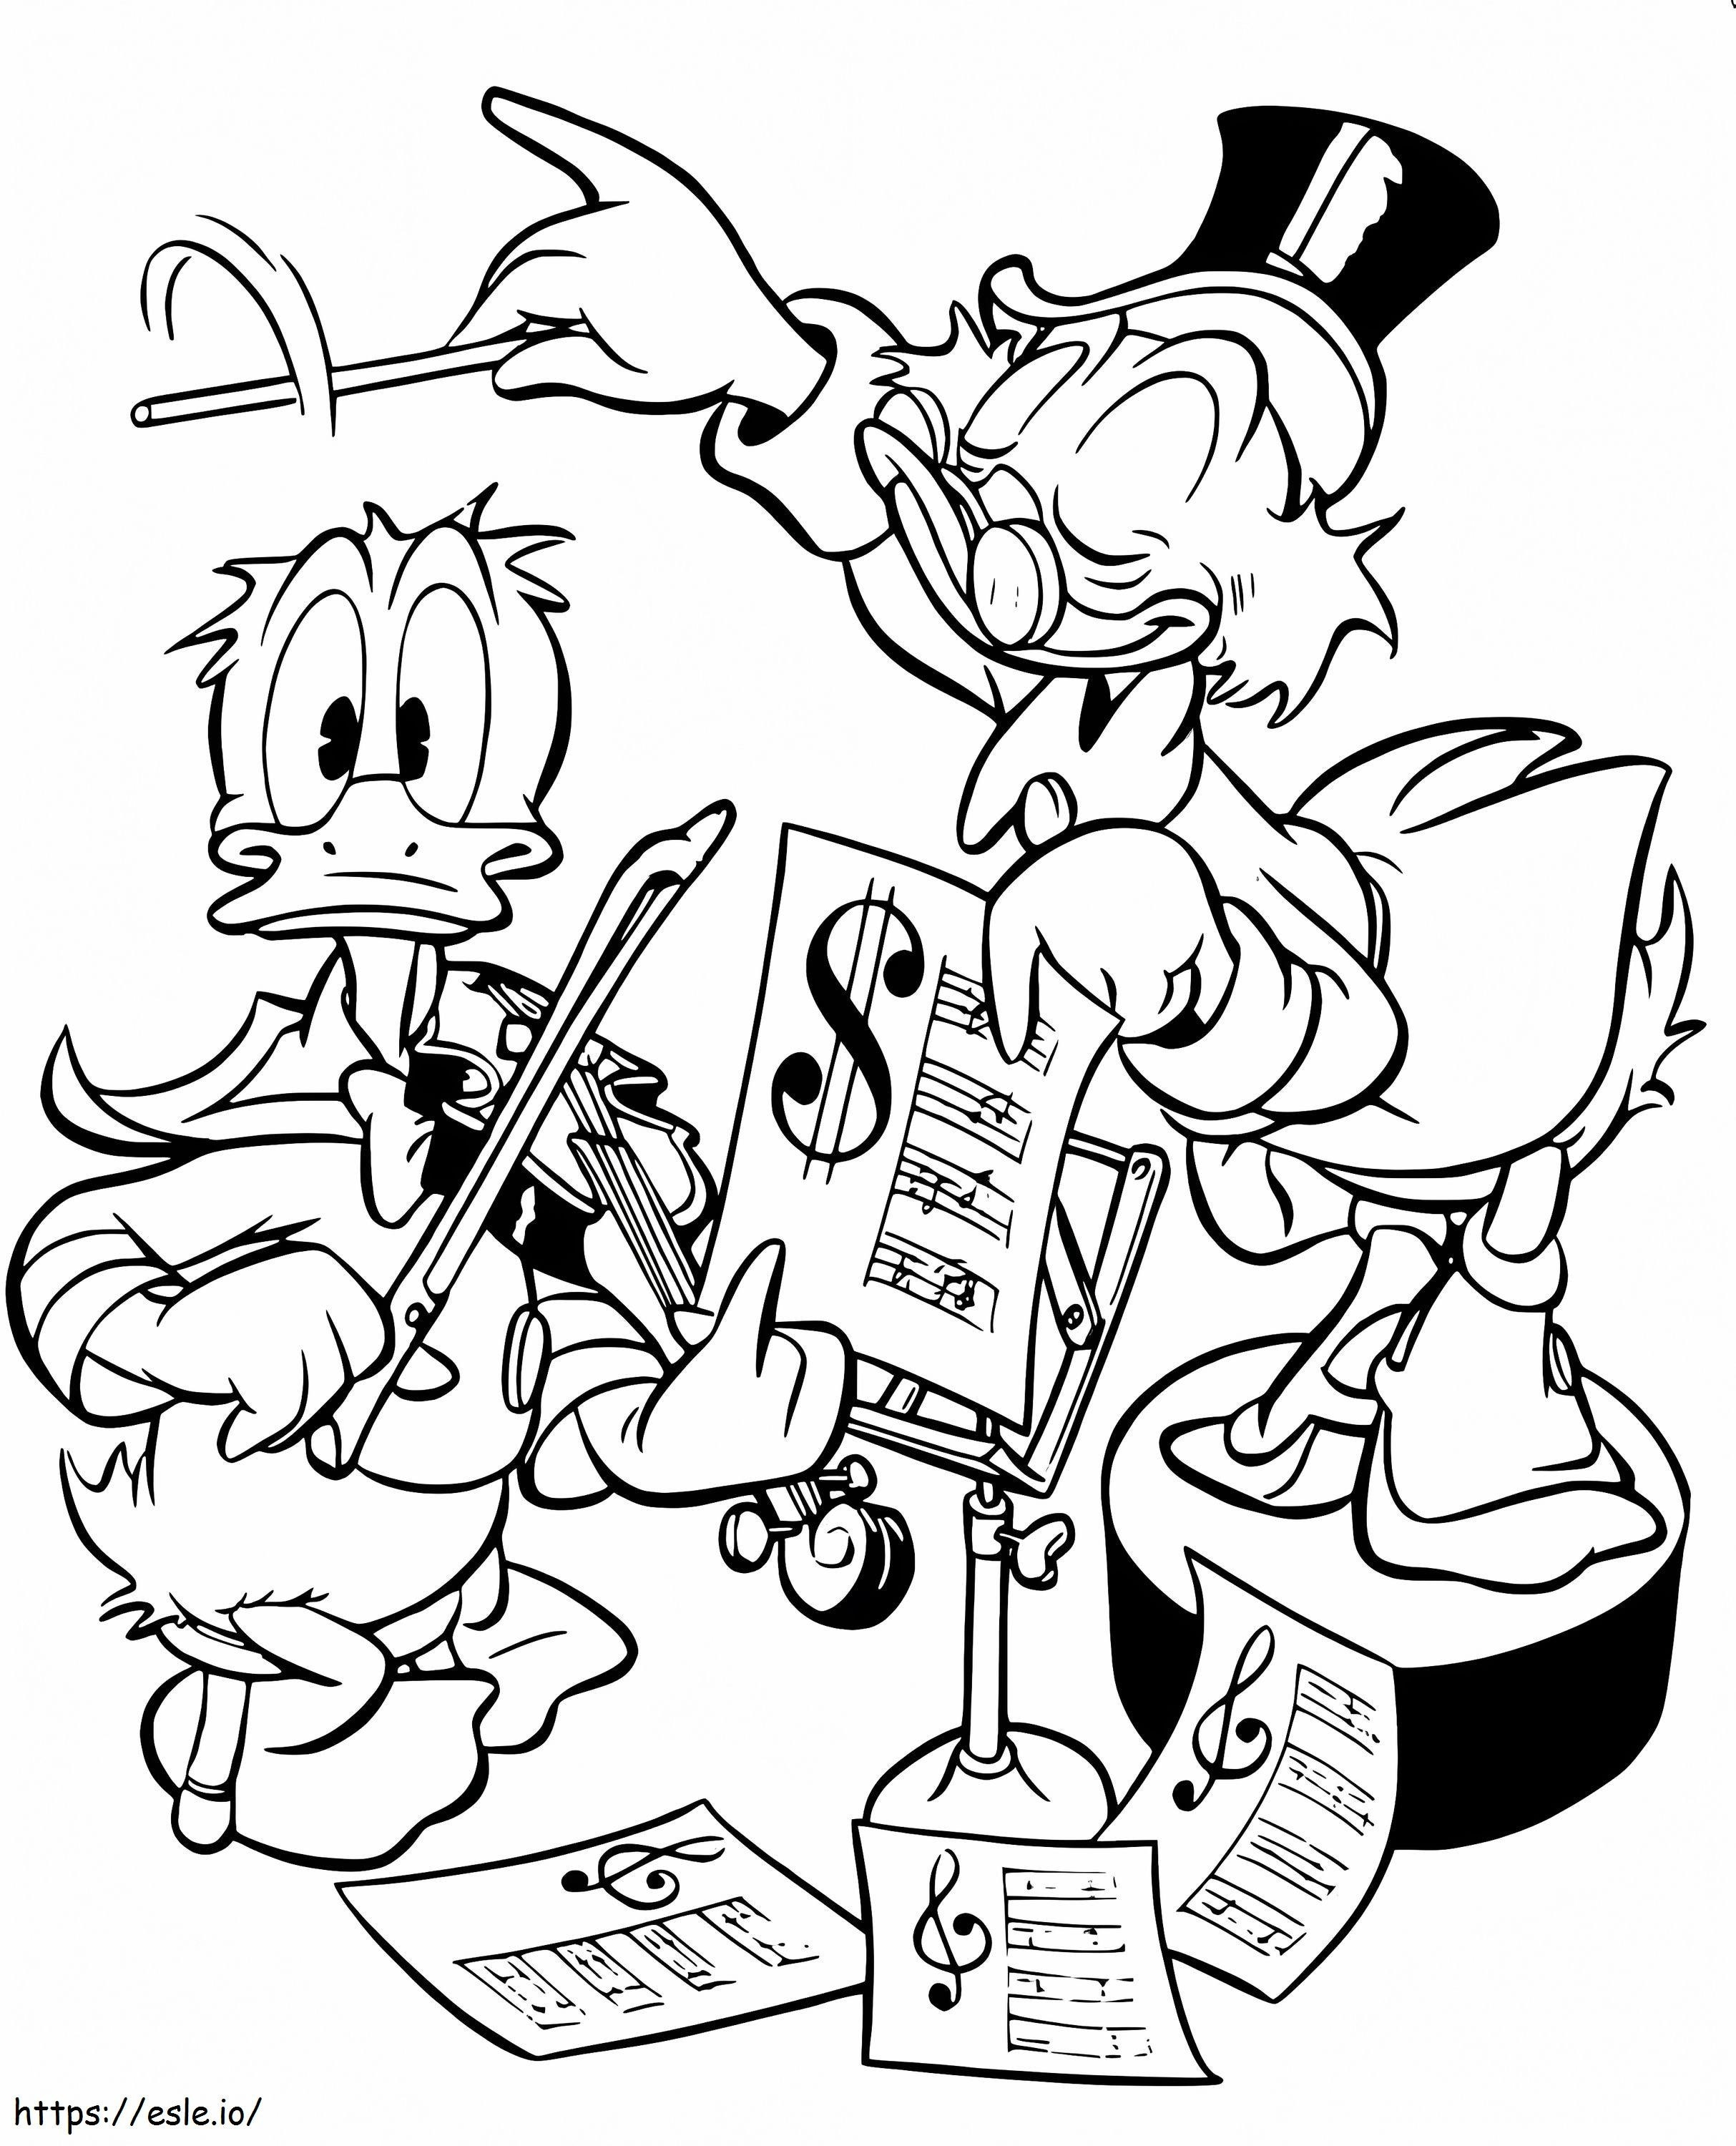 Donald And Scrooge McDuck coloring page